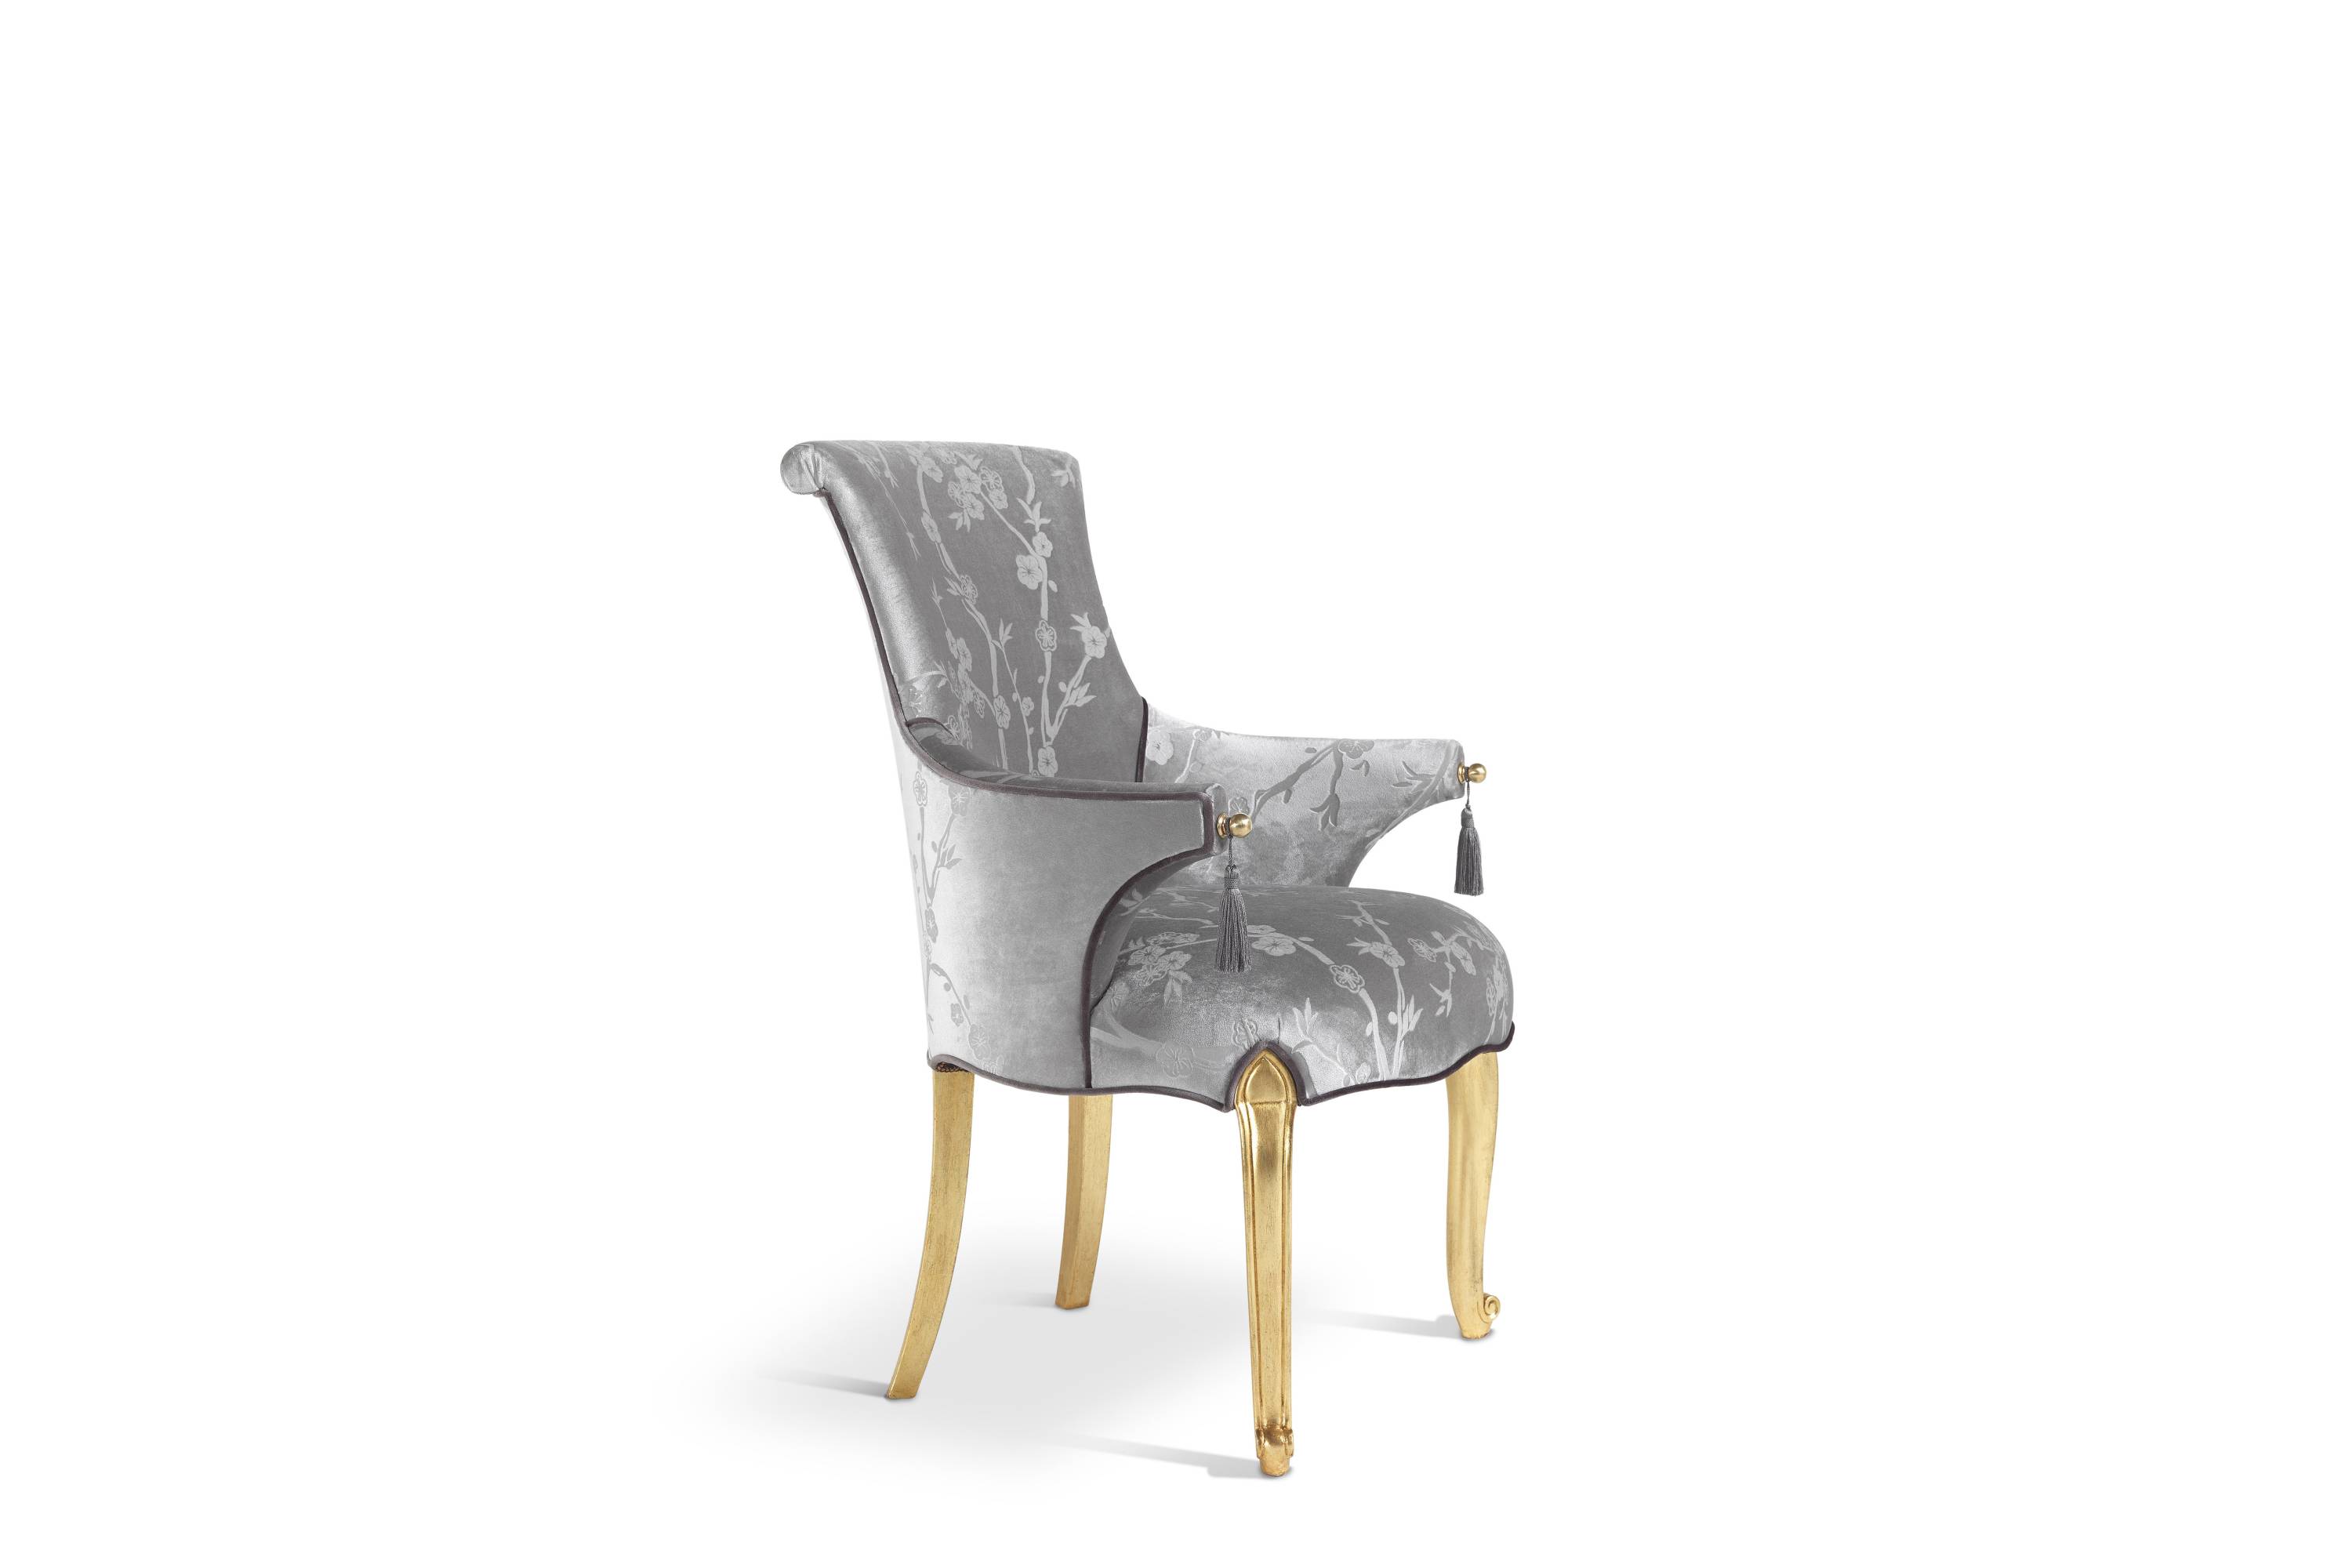 RIVOLI chair with armrests – Transform your space with sophisticated Made in Italy classic chairs.